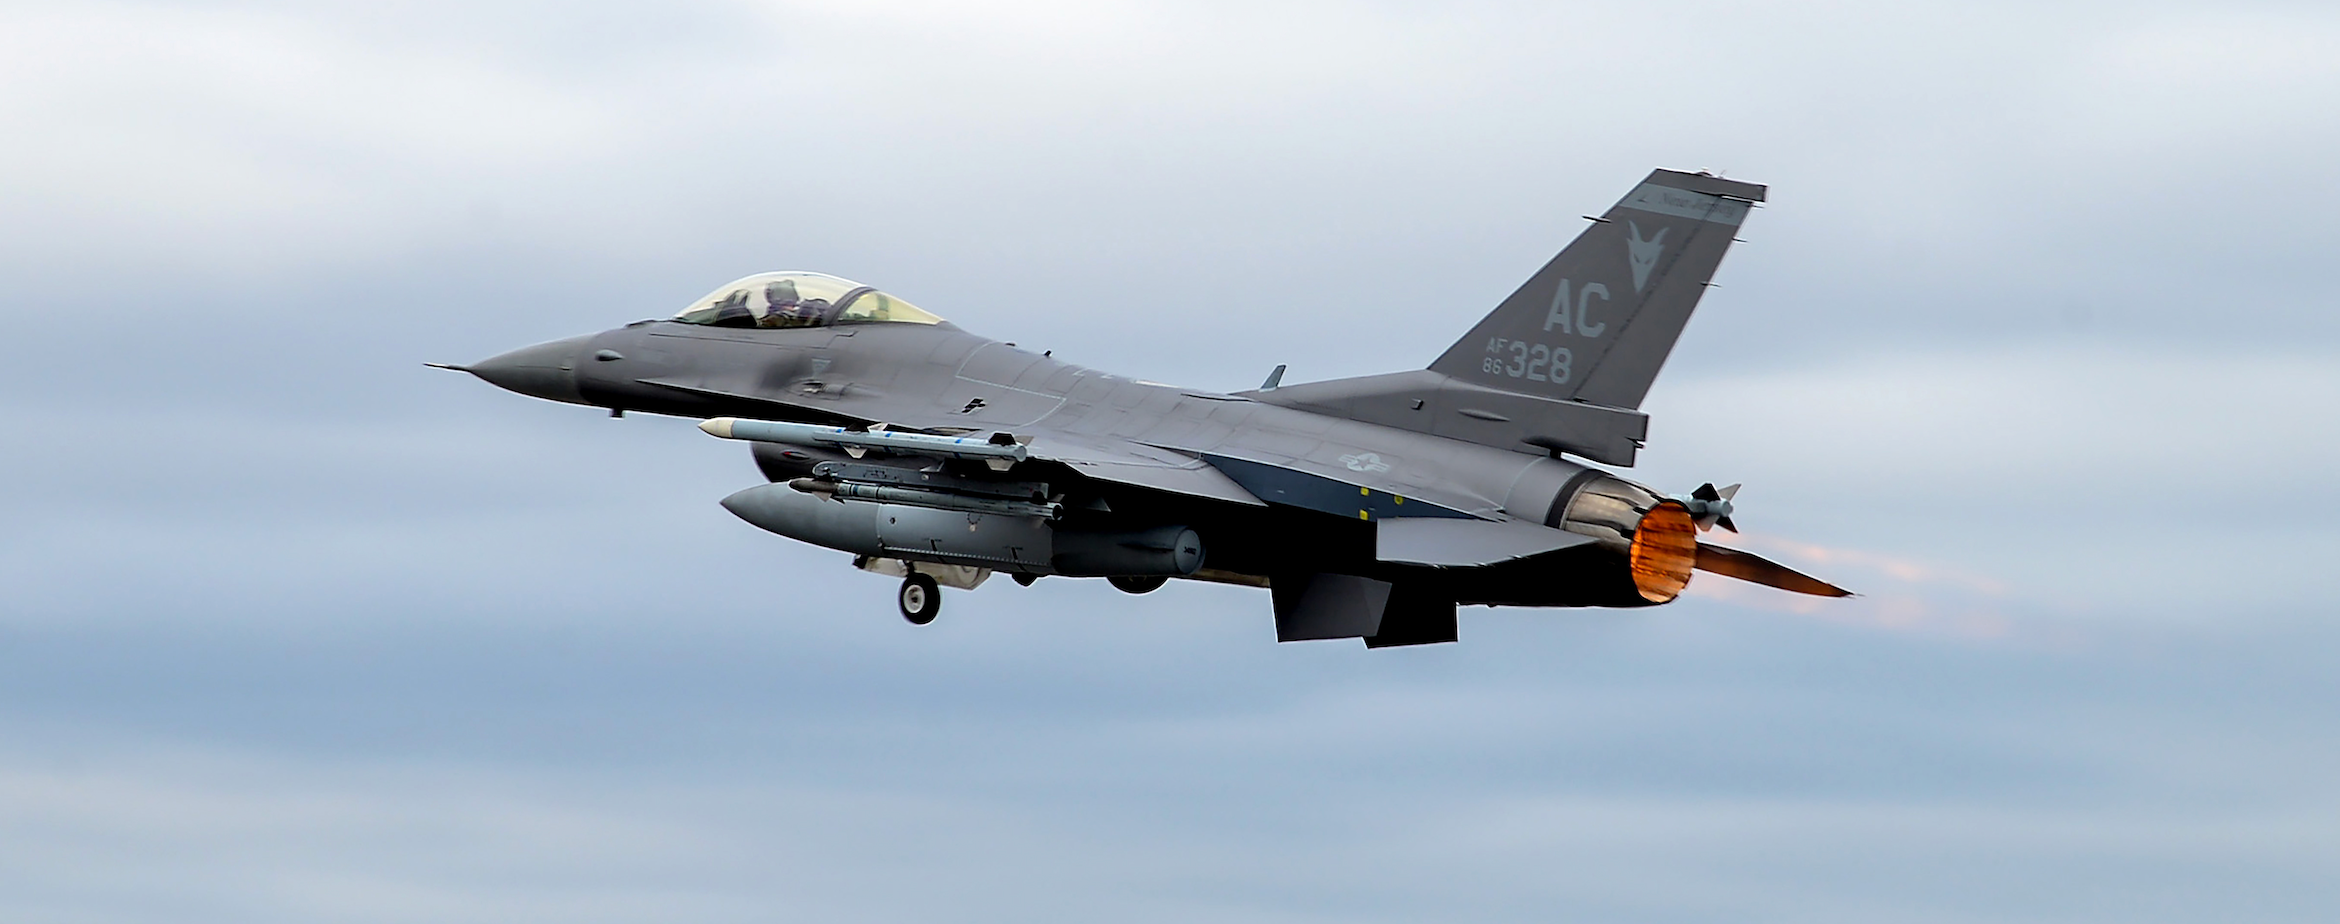 A U.S. Air Force F-16C Fighting Falcon takes off April 1, 2020, at the 177th Fighter Wing, Egg Harbor Township, N.J